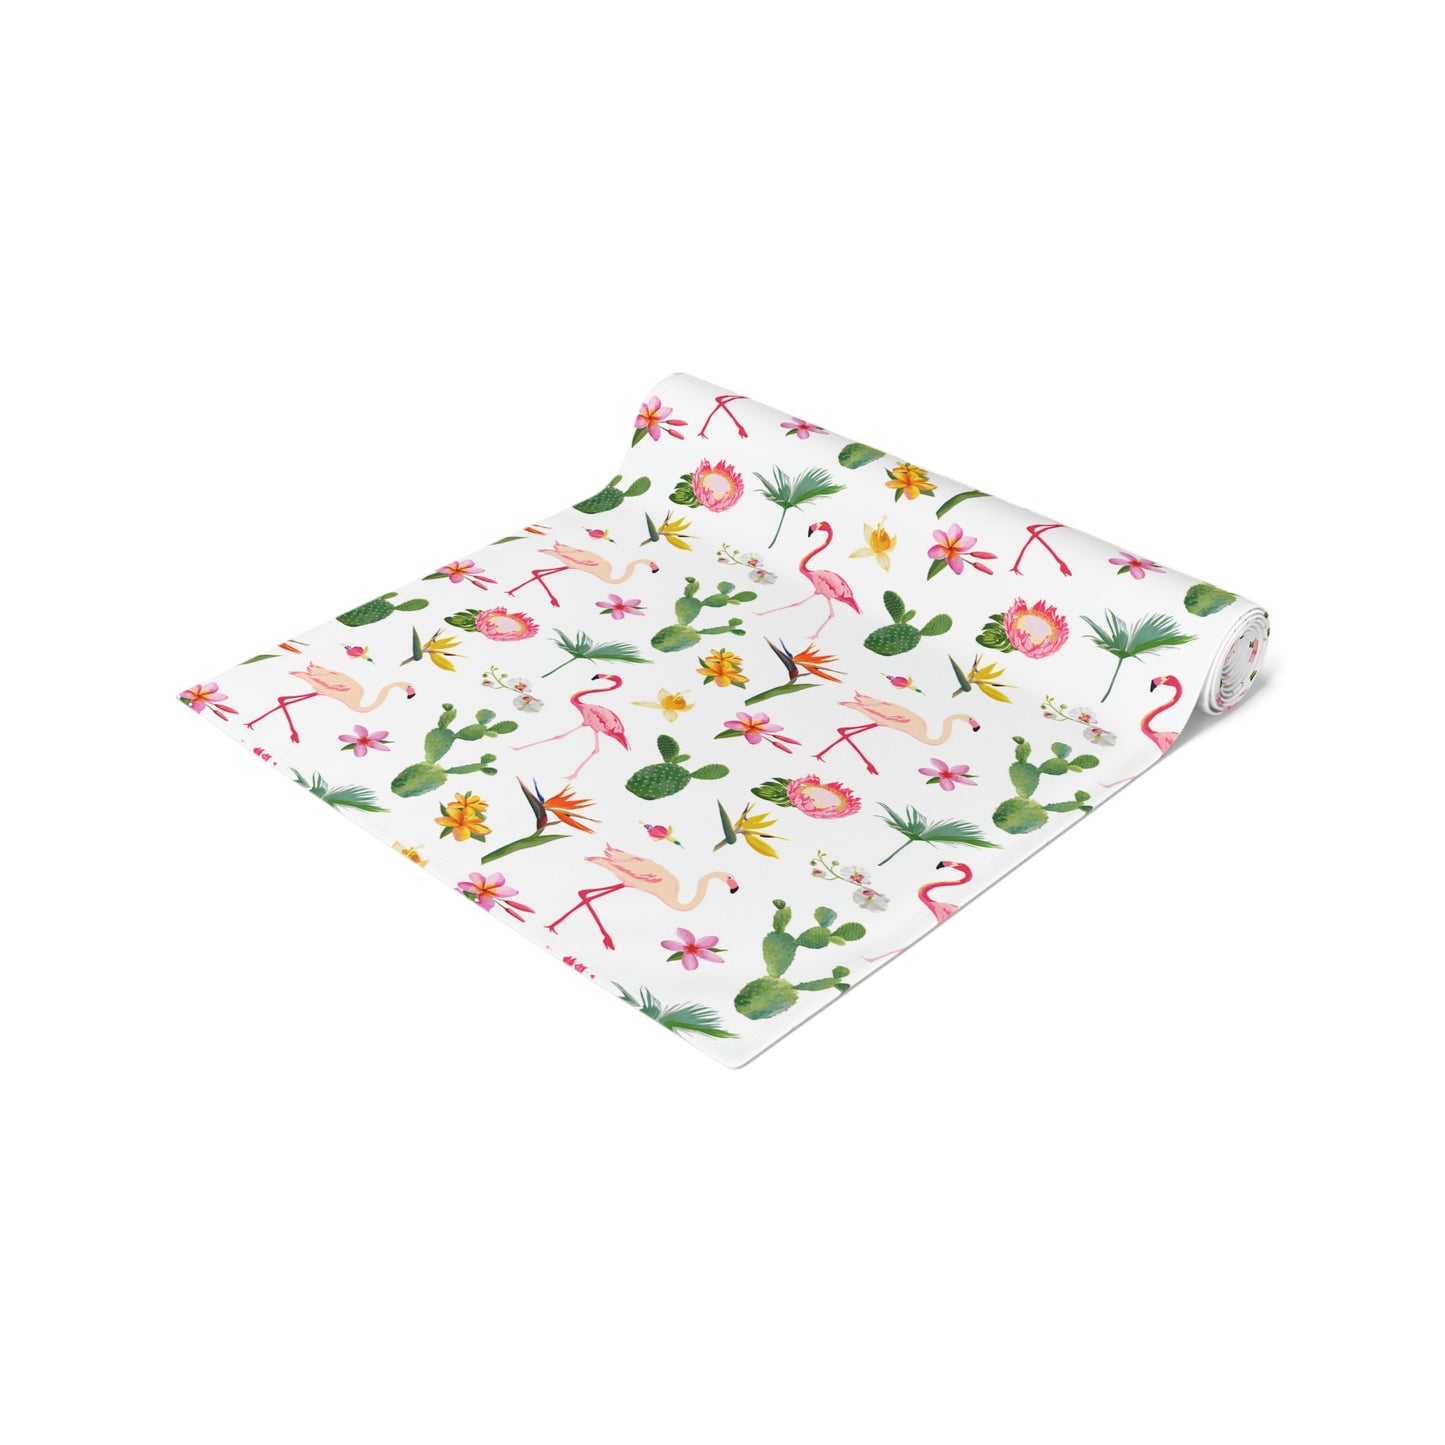 Cactus and Flamingos Table Runner (Cotton, Poly)